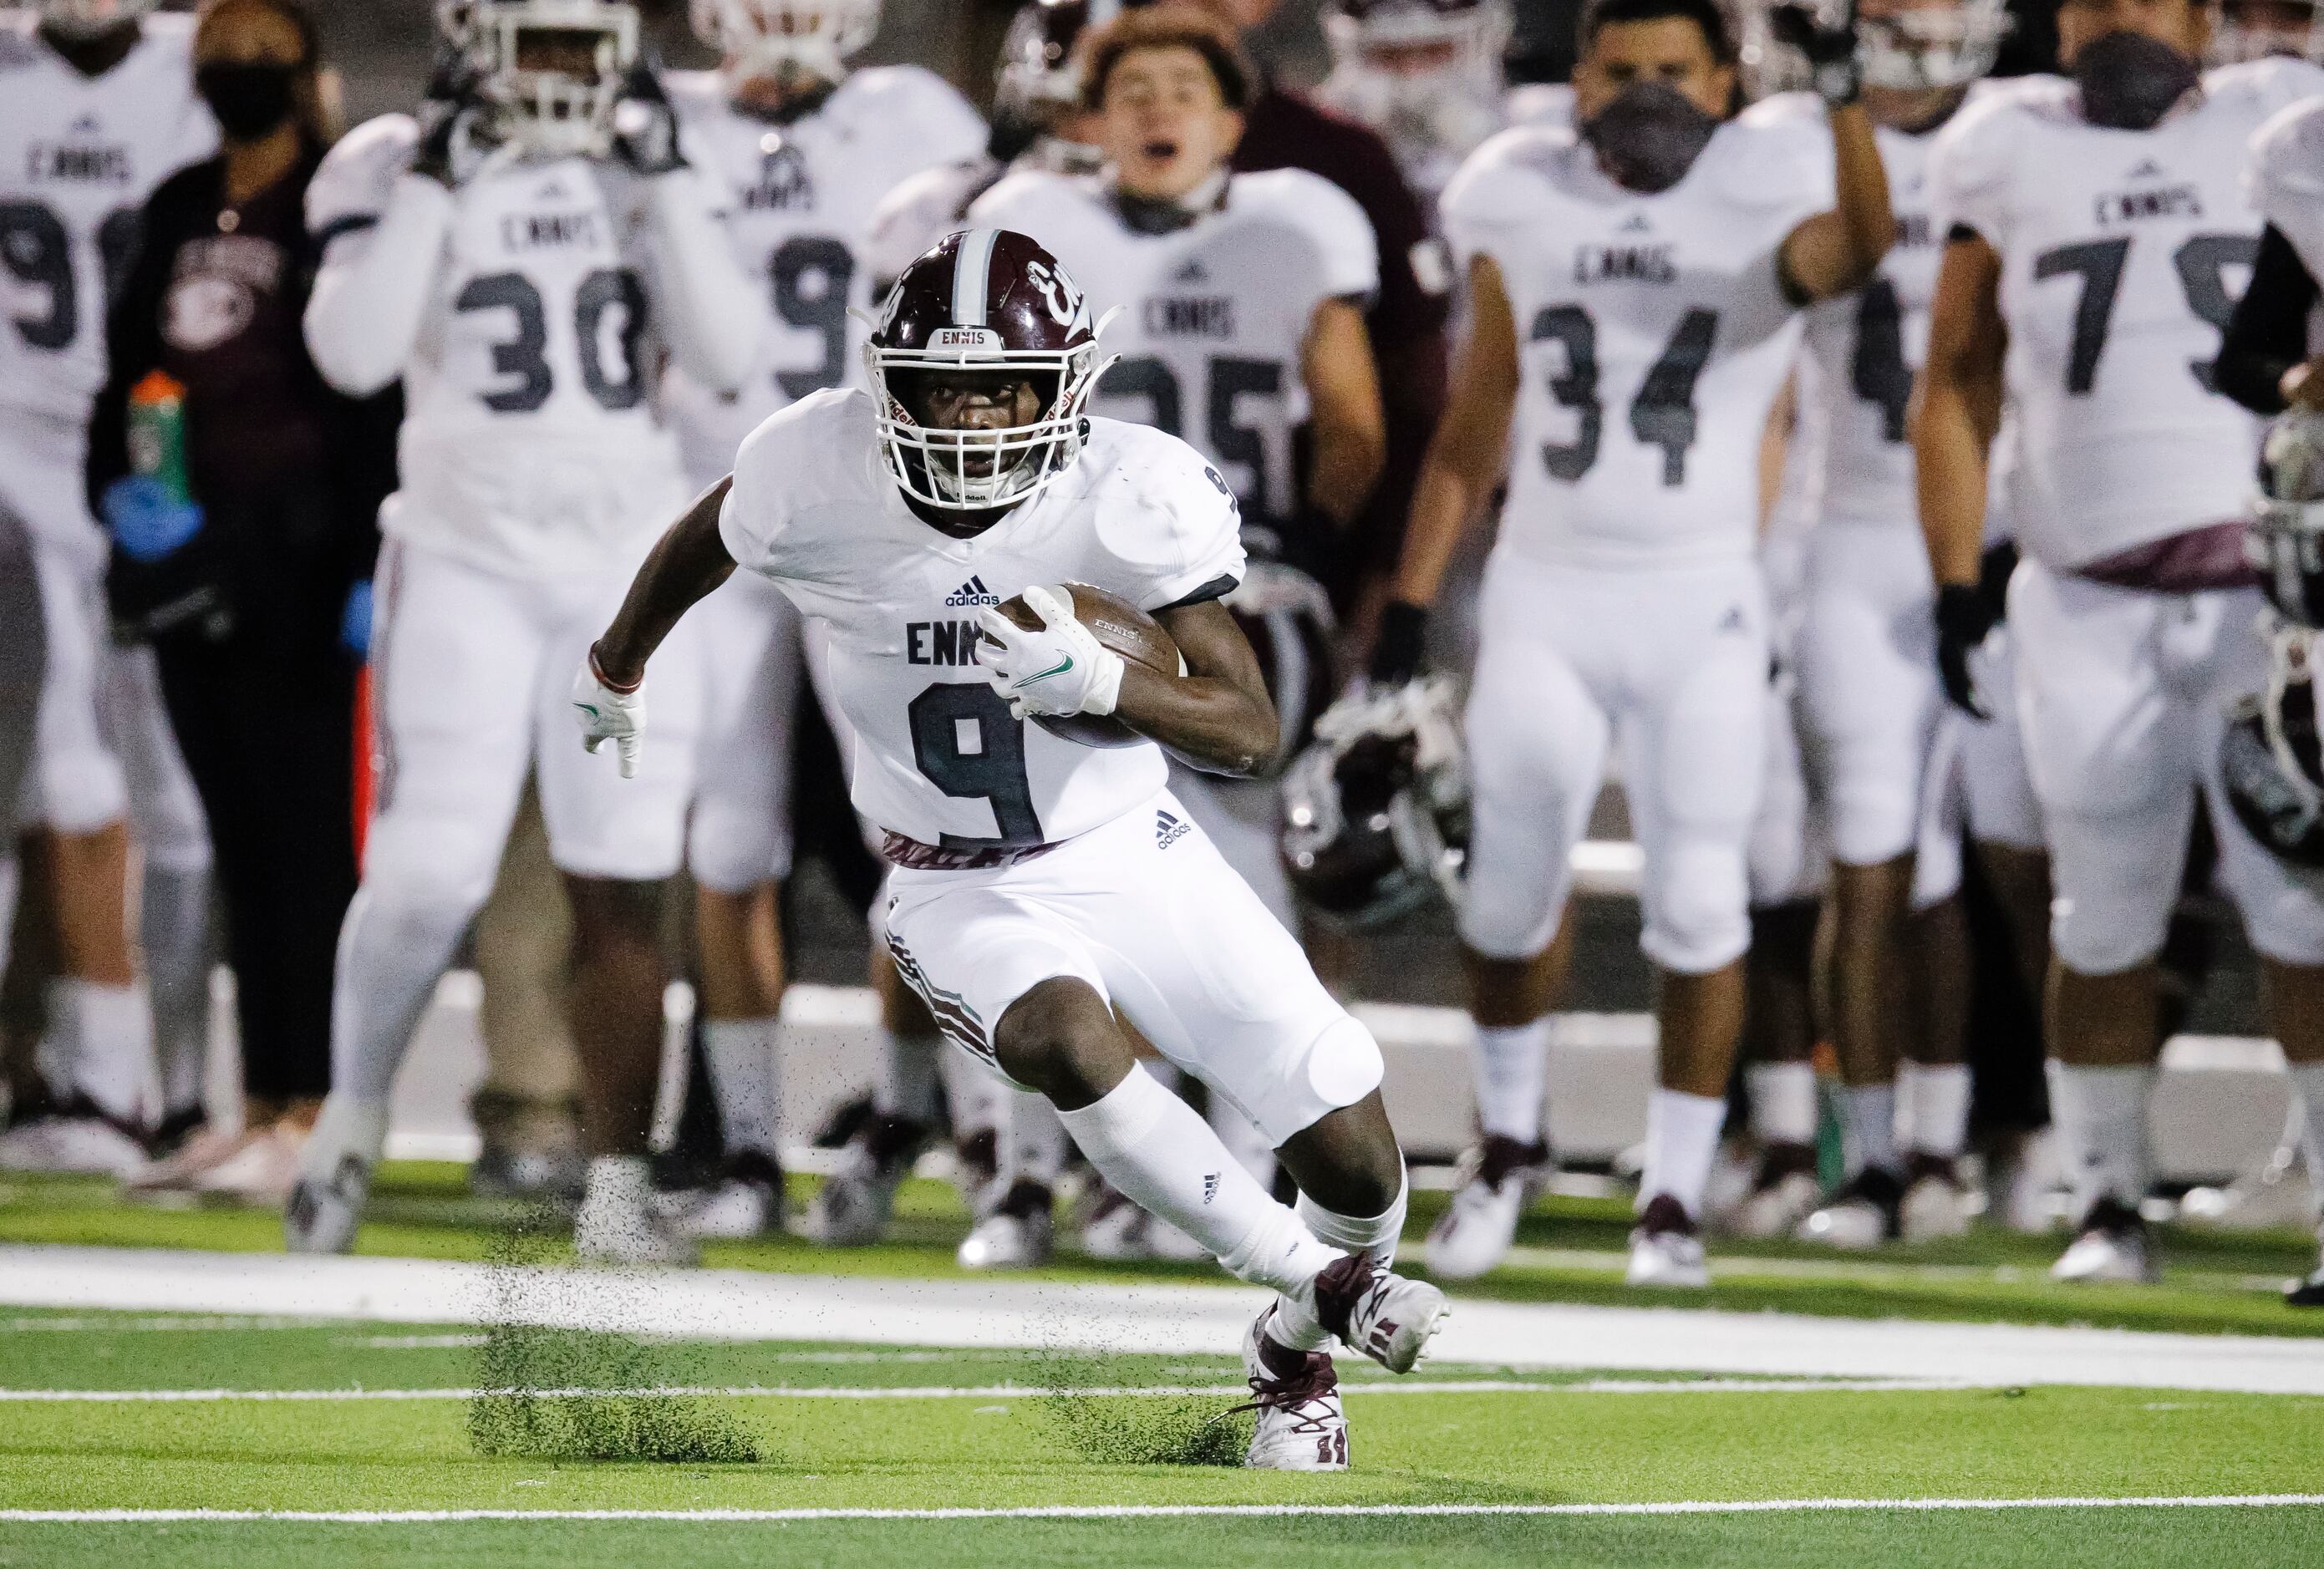 Ennis junior wide receiver Devion Beasley looks for room against the North Forney defense...